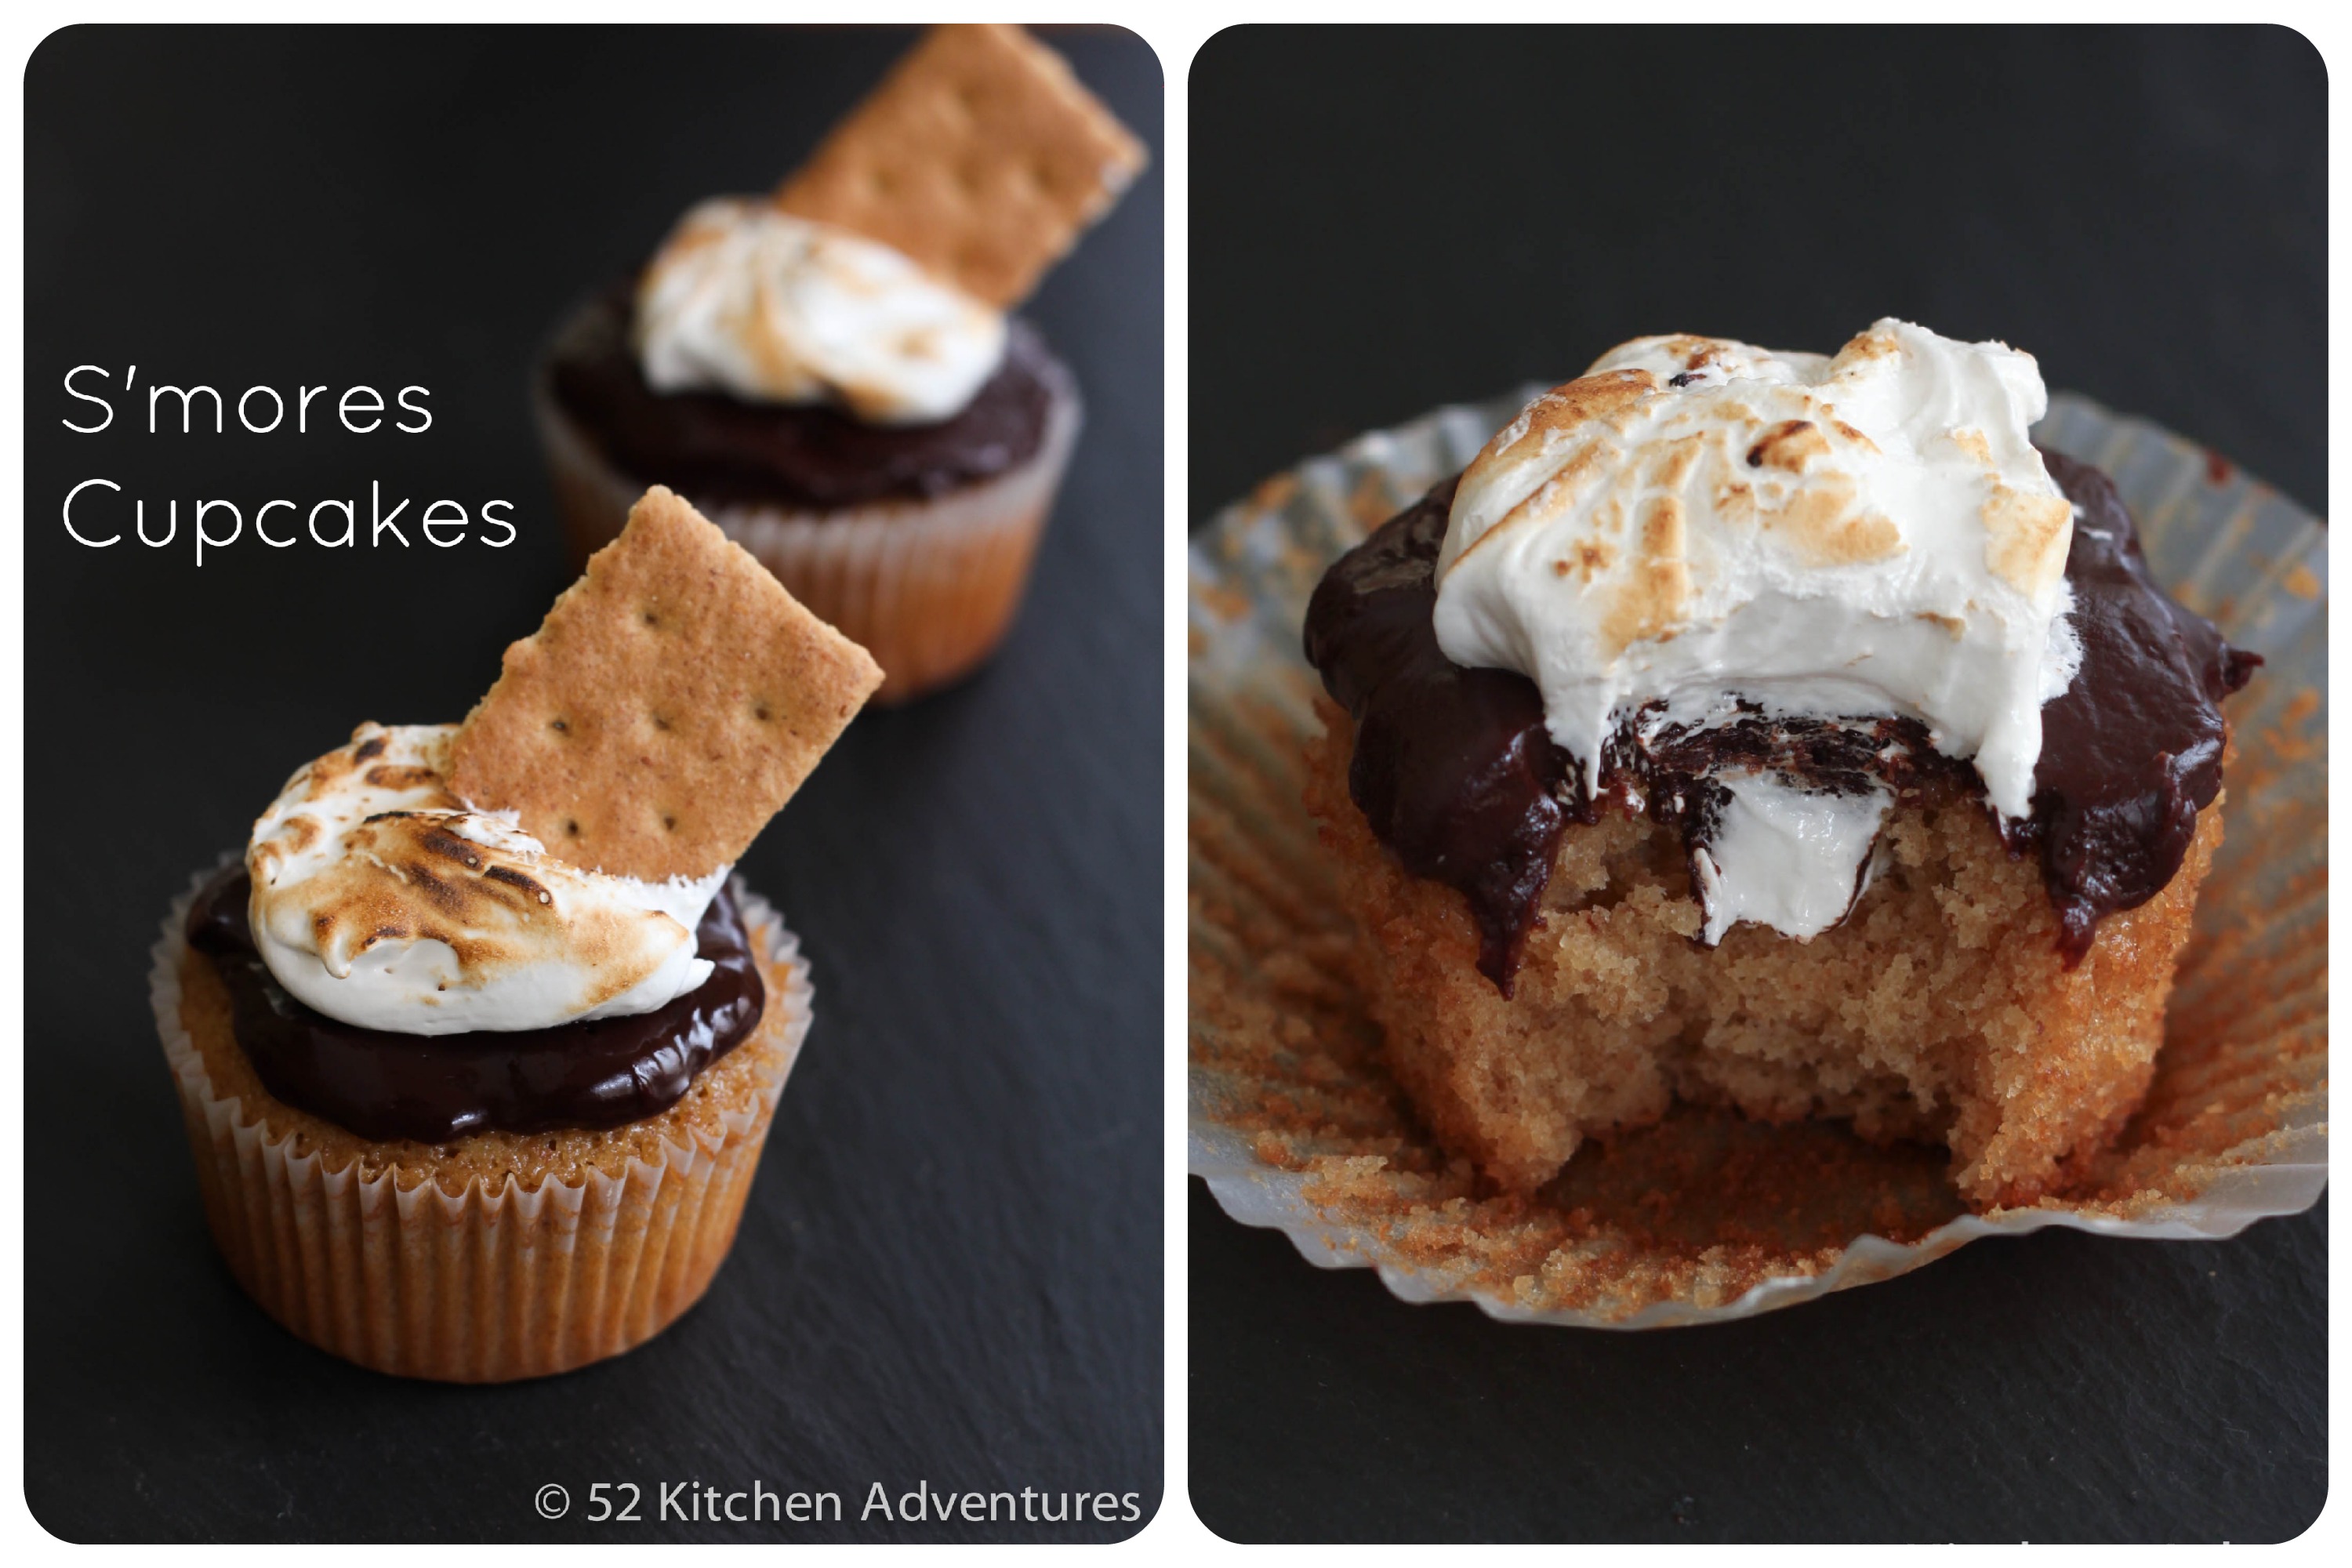 S’mores Cupcakes at 52 Kitchen Adventures